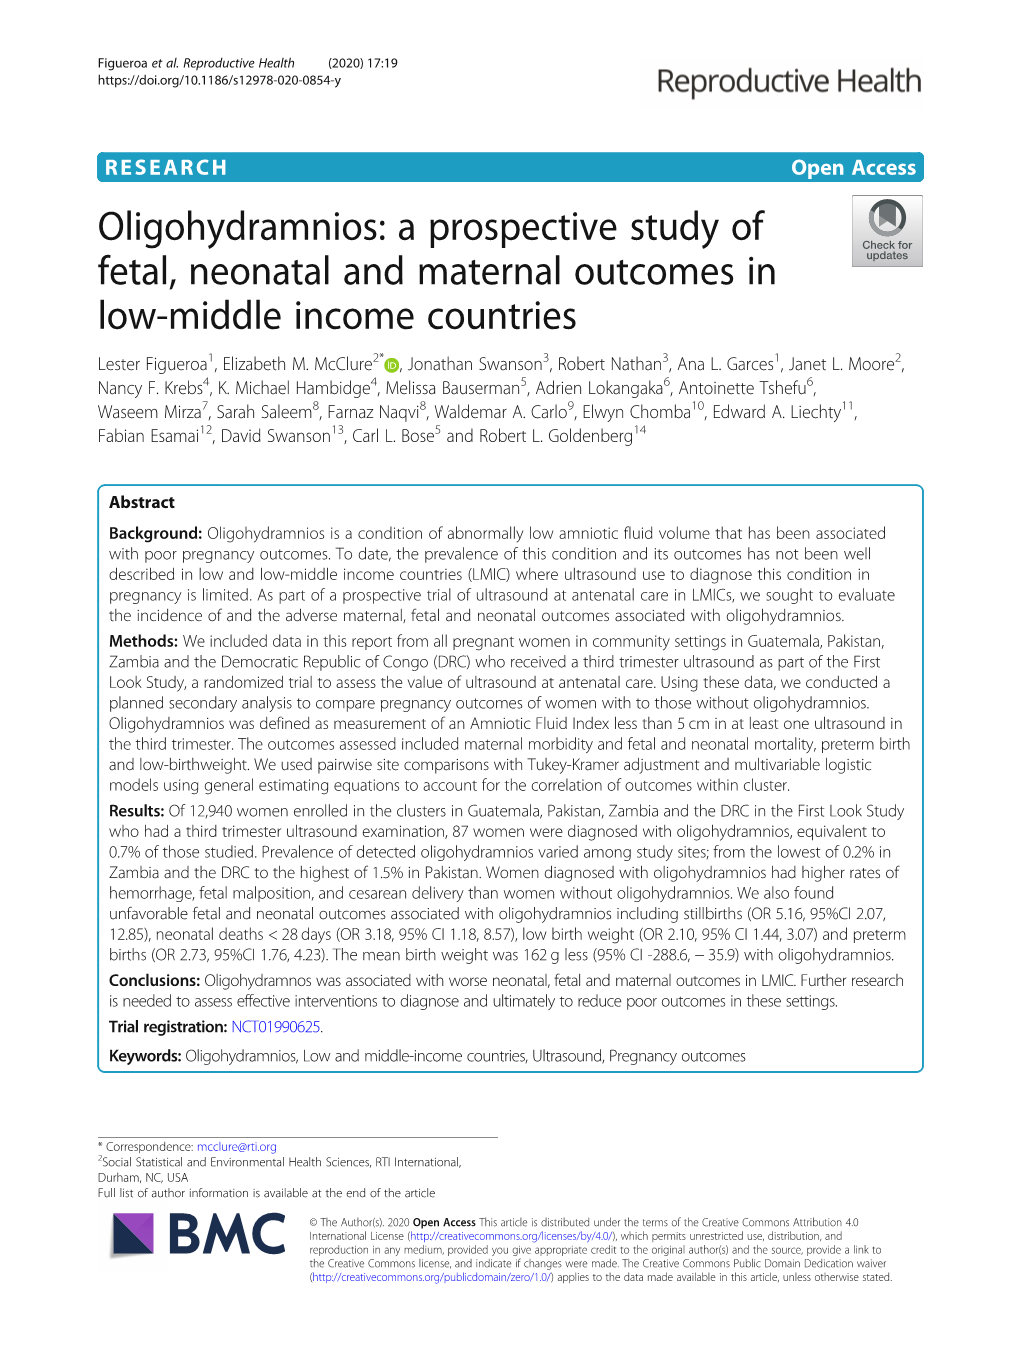 A Prospective Study of Fetal, Neonatal and Maternal Outcomes in Low-Middle Income Countries Lester Figueroa1, Elizabeth M